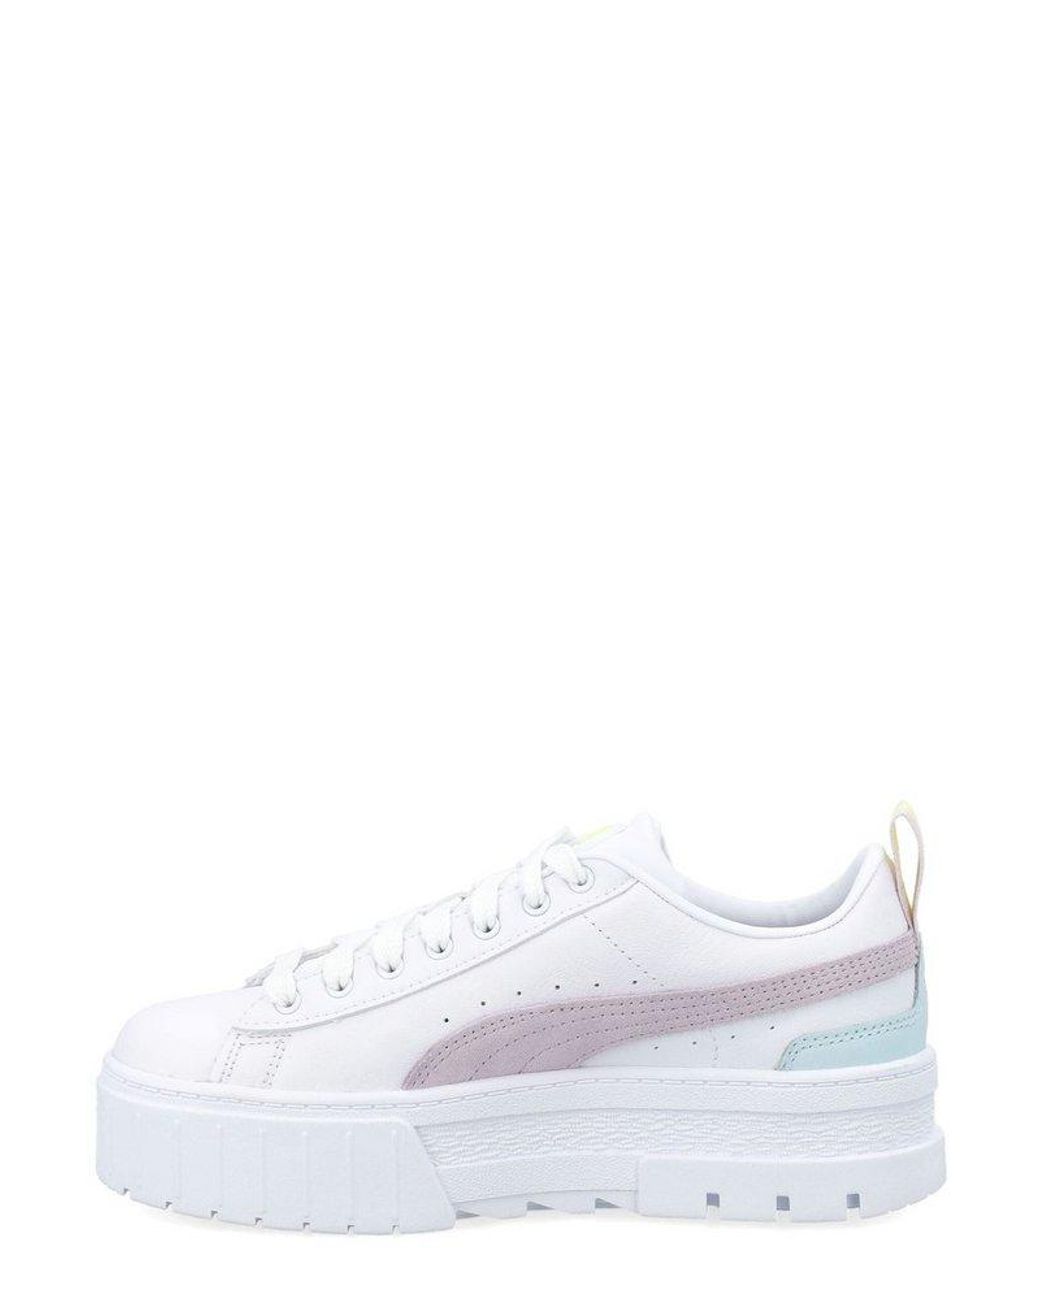 PUMA Leather Mayze Chunky Sole Sneakers in White | Lyst Canada